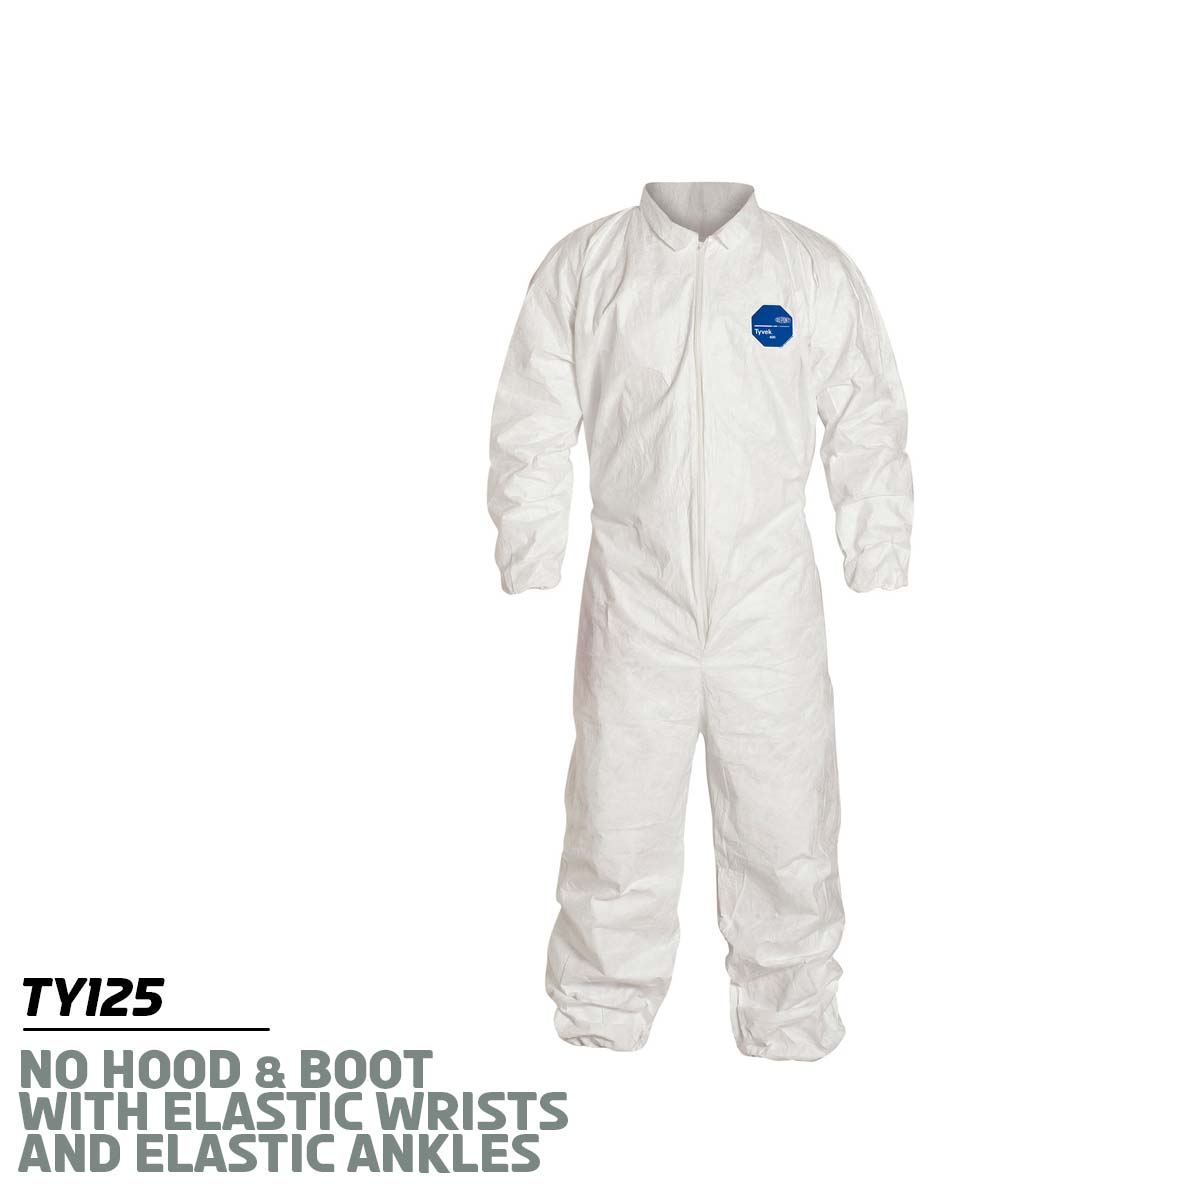 No Hood • No Boots / Elastic Wrists / Ankles / Medium DuPont™ White Tyvek® 400 Disposable Coveralls Work Safety Protective Gear